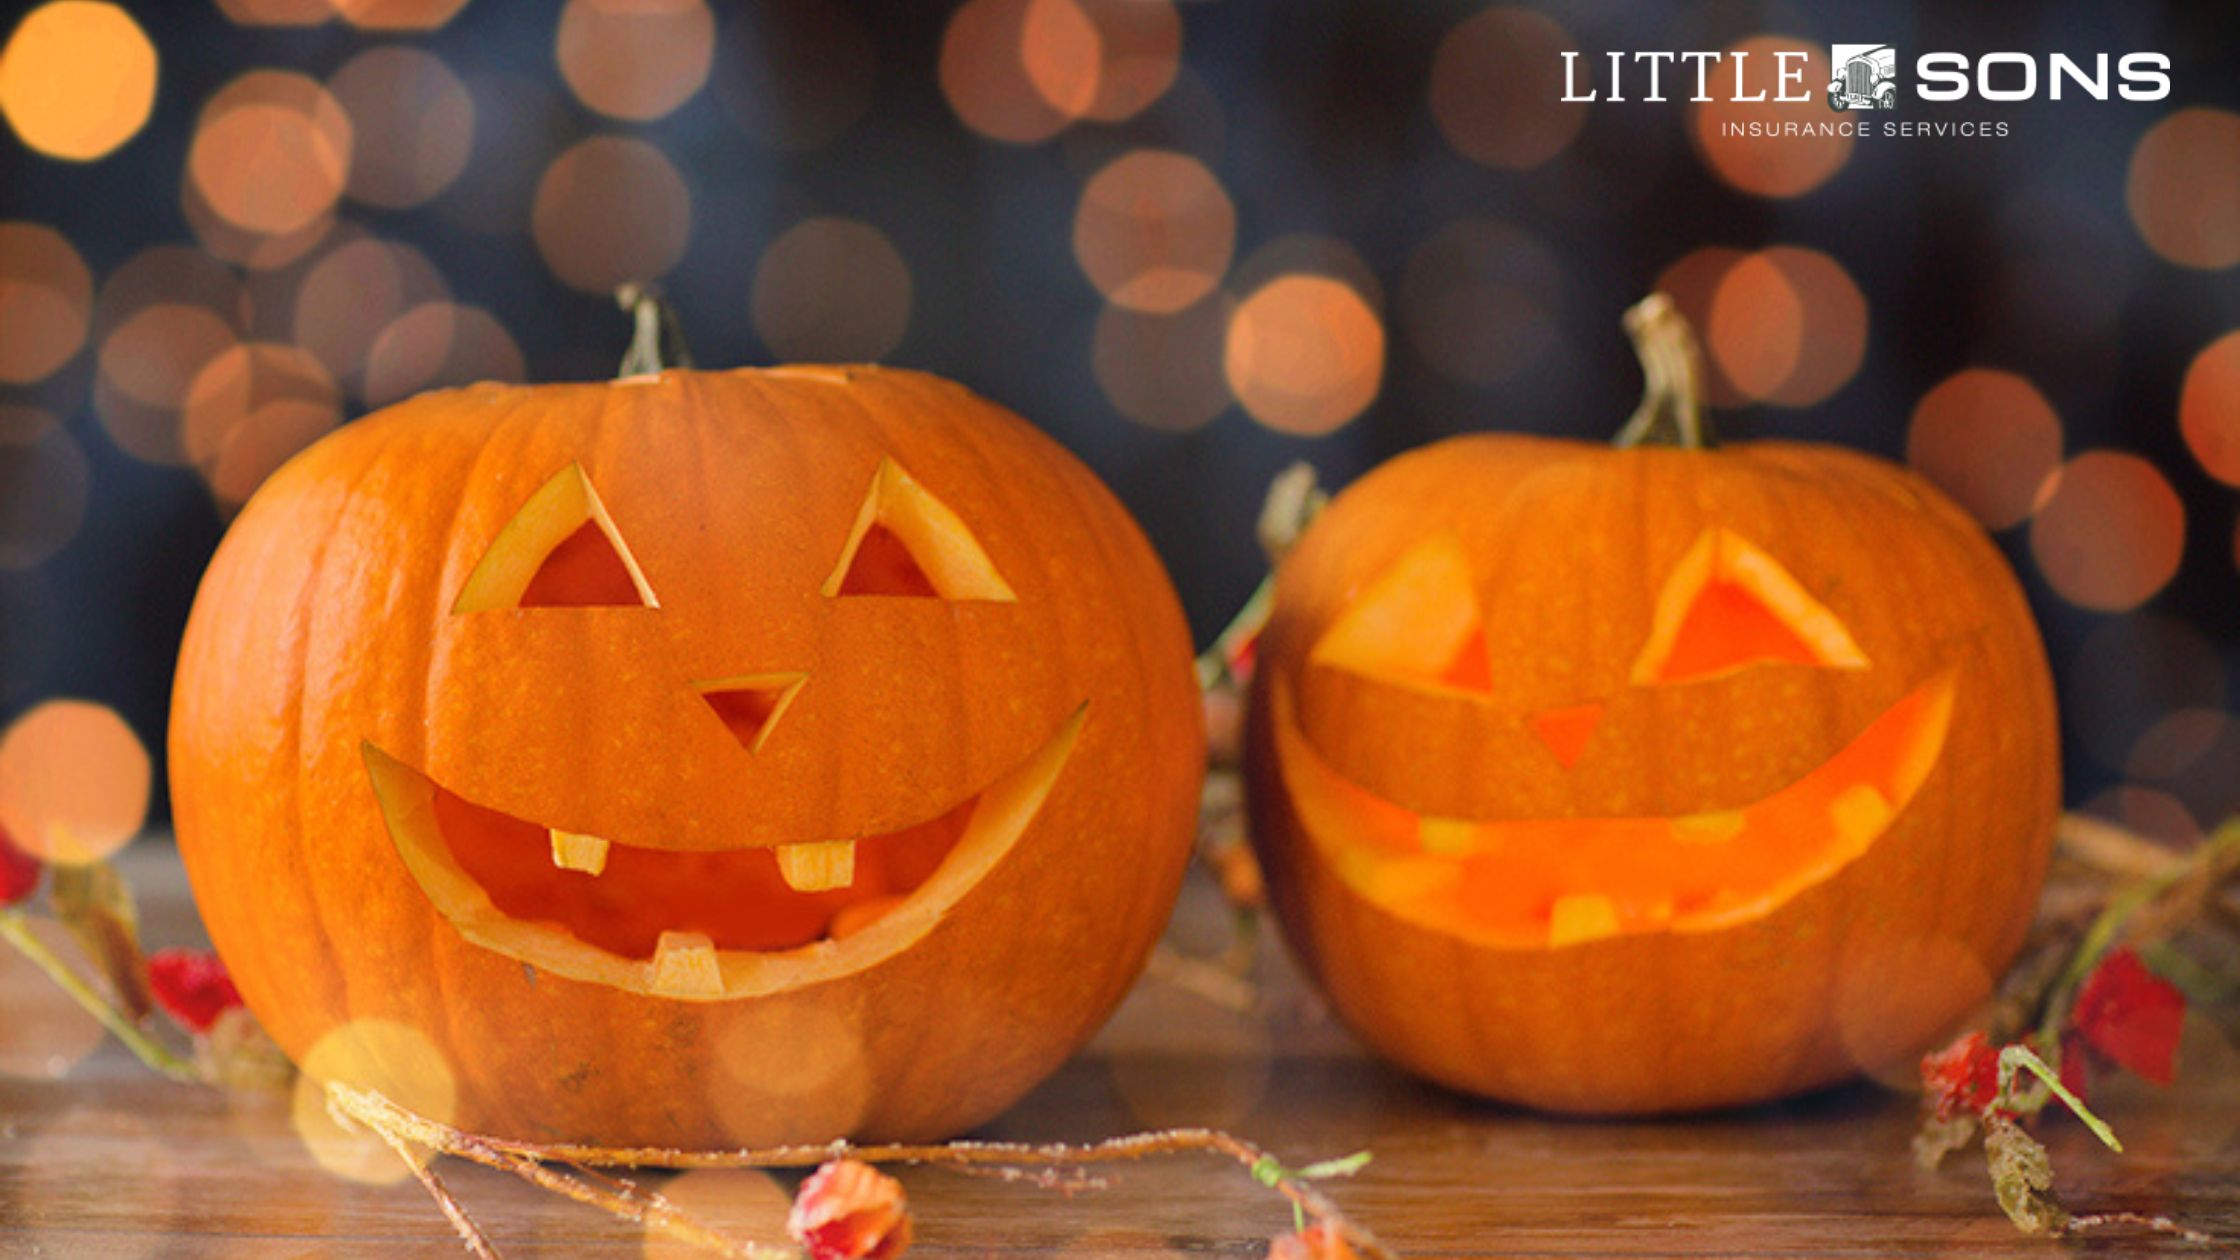 Halloween Safety Tips for Your Home